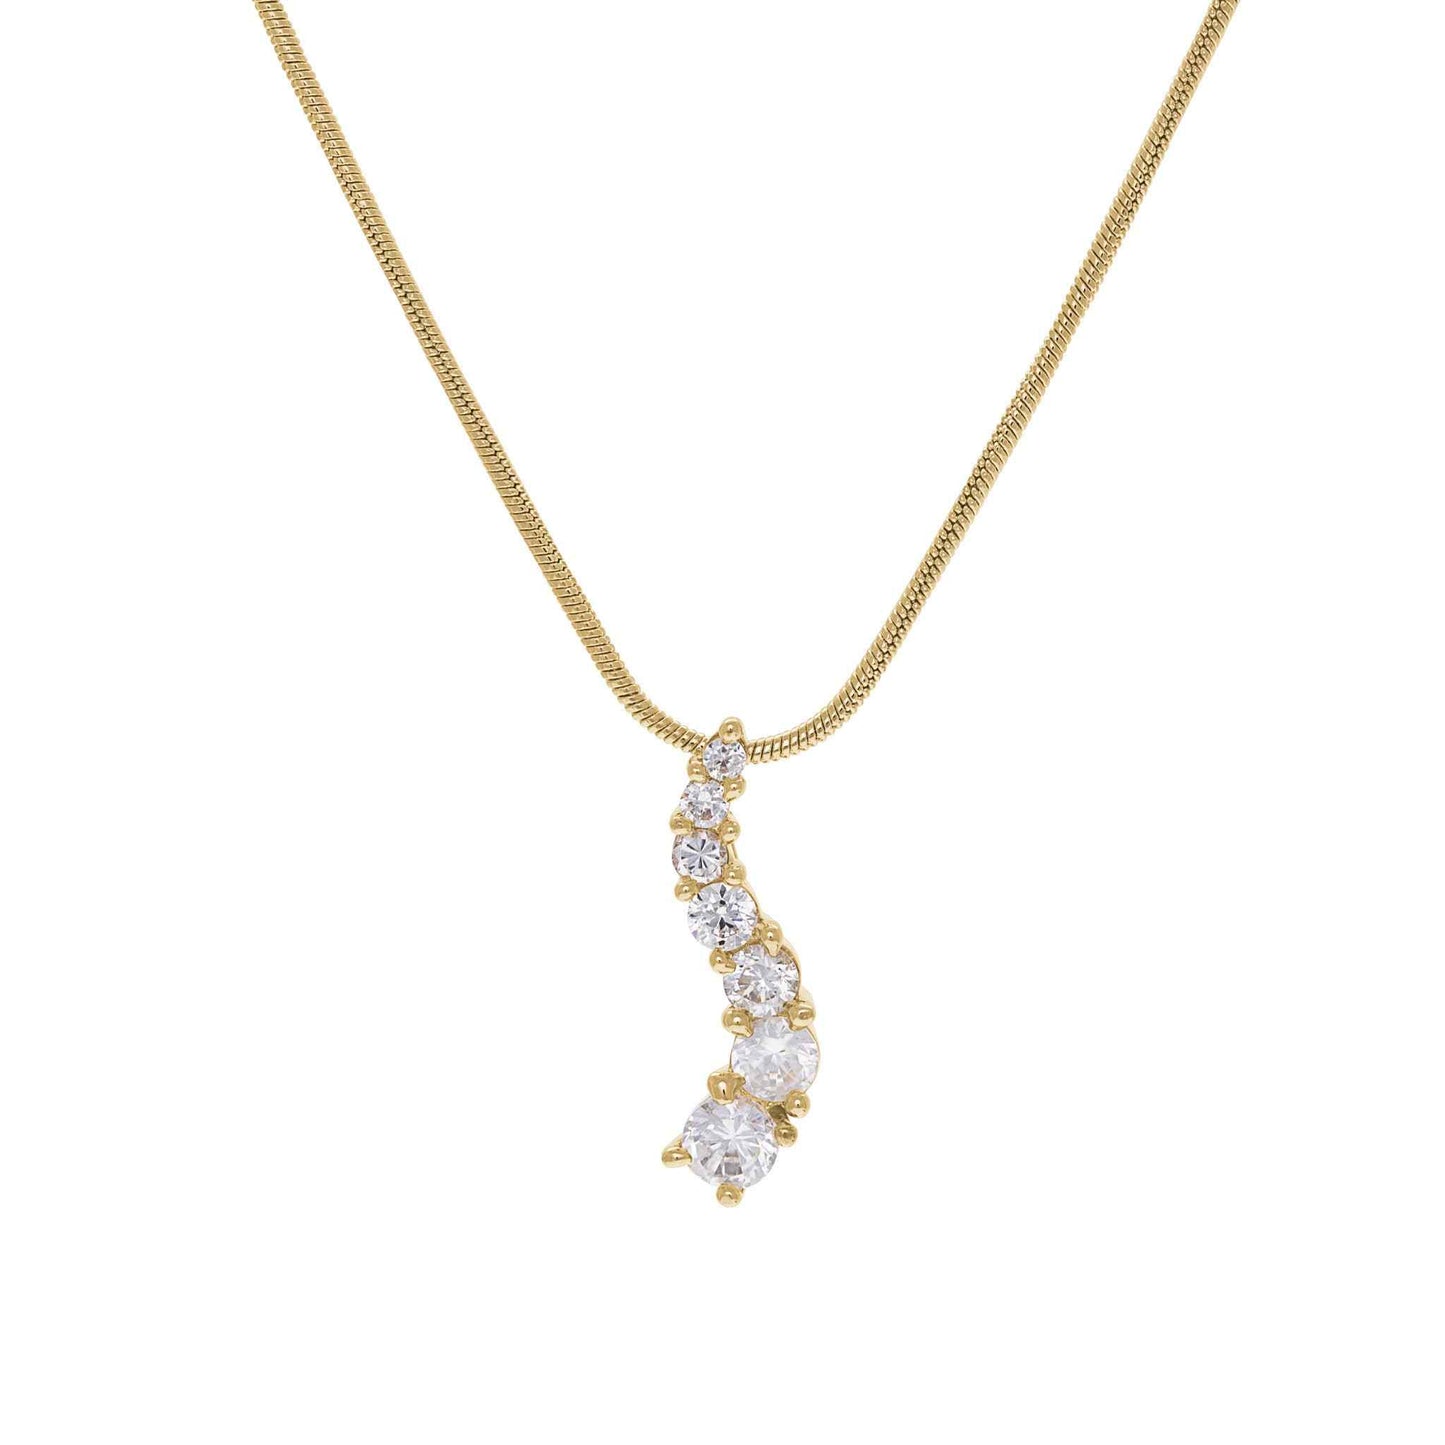 A graduated wave simulated diamond journey necklace displayed on a neutral white background.